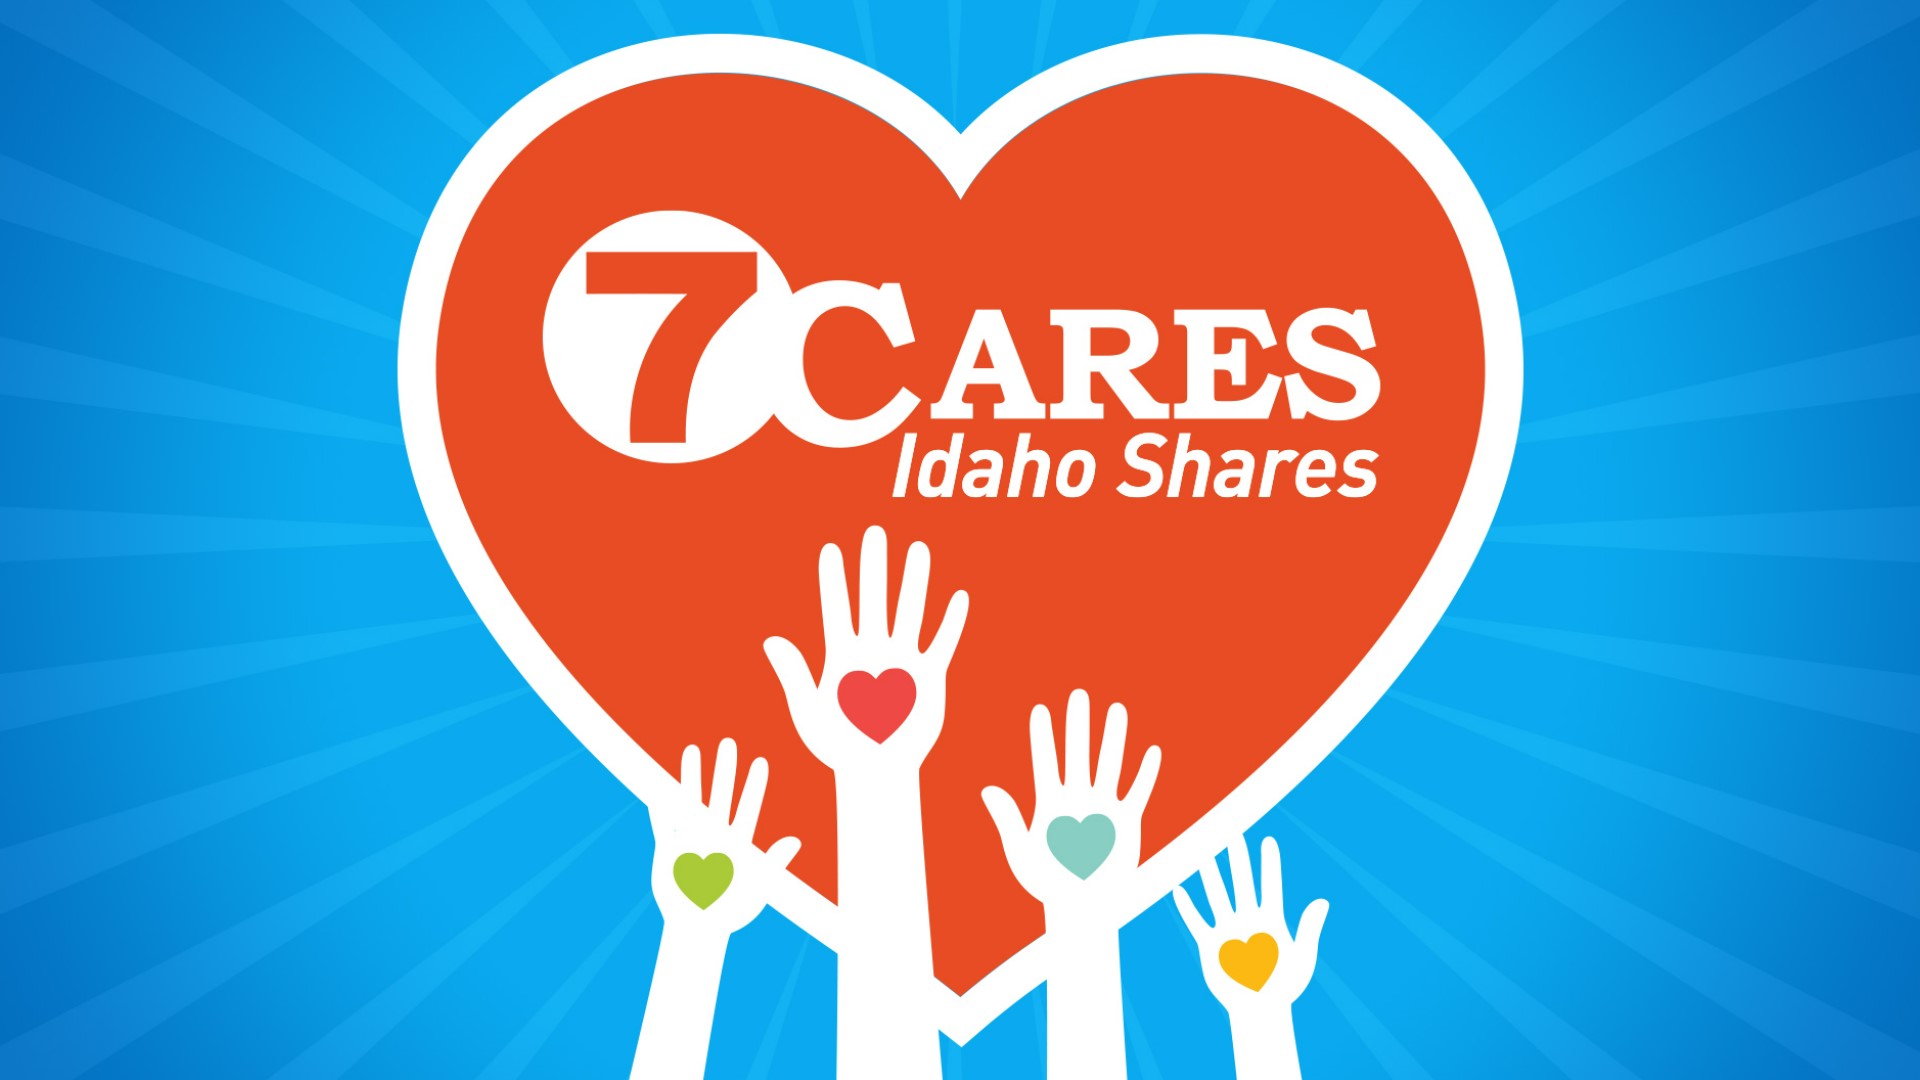 It was a great morning highlighting the community's generosity in southwestern Idaho as KTVB put a bow on the 16th annual 7Cares Idaho Shares giving campaign.